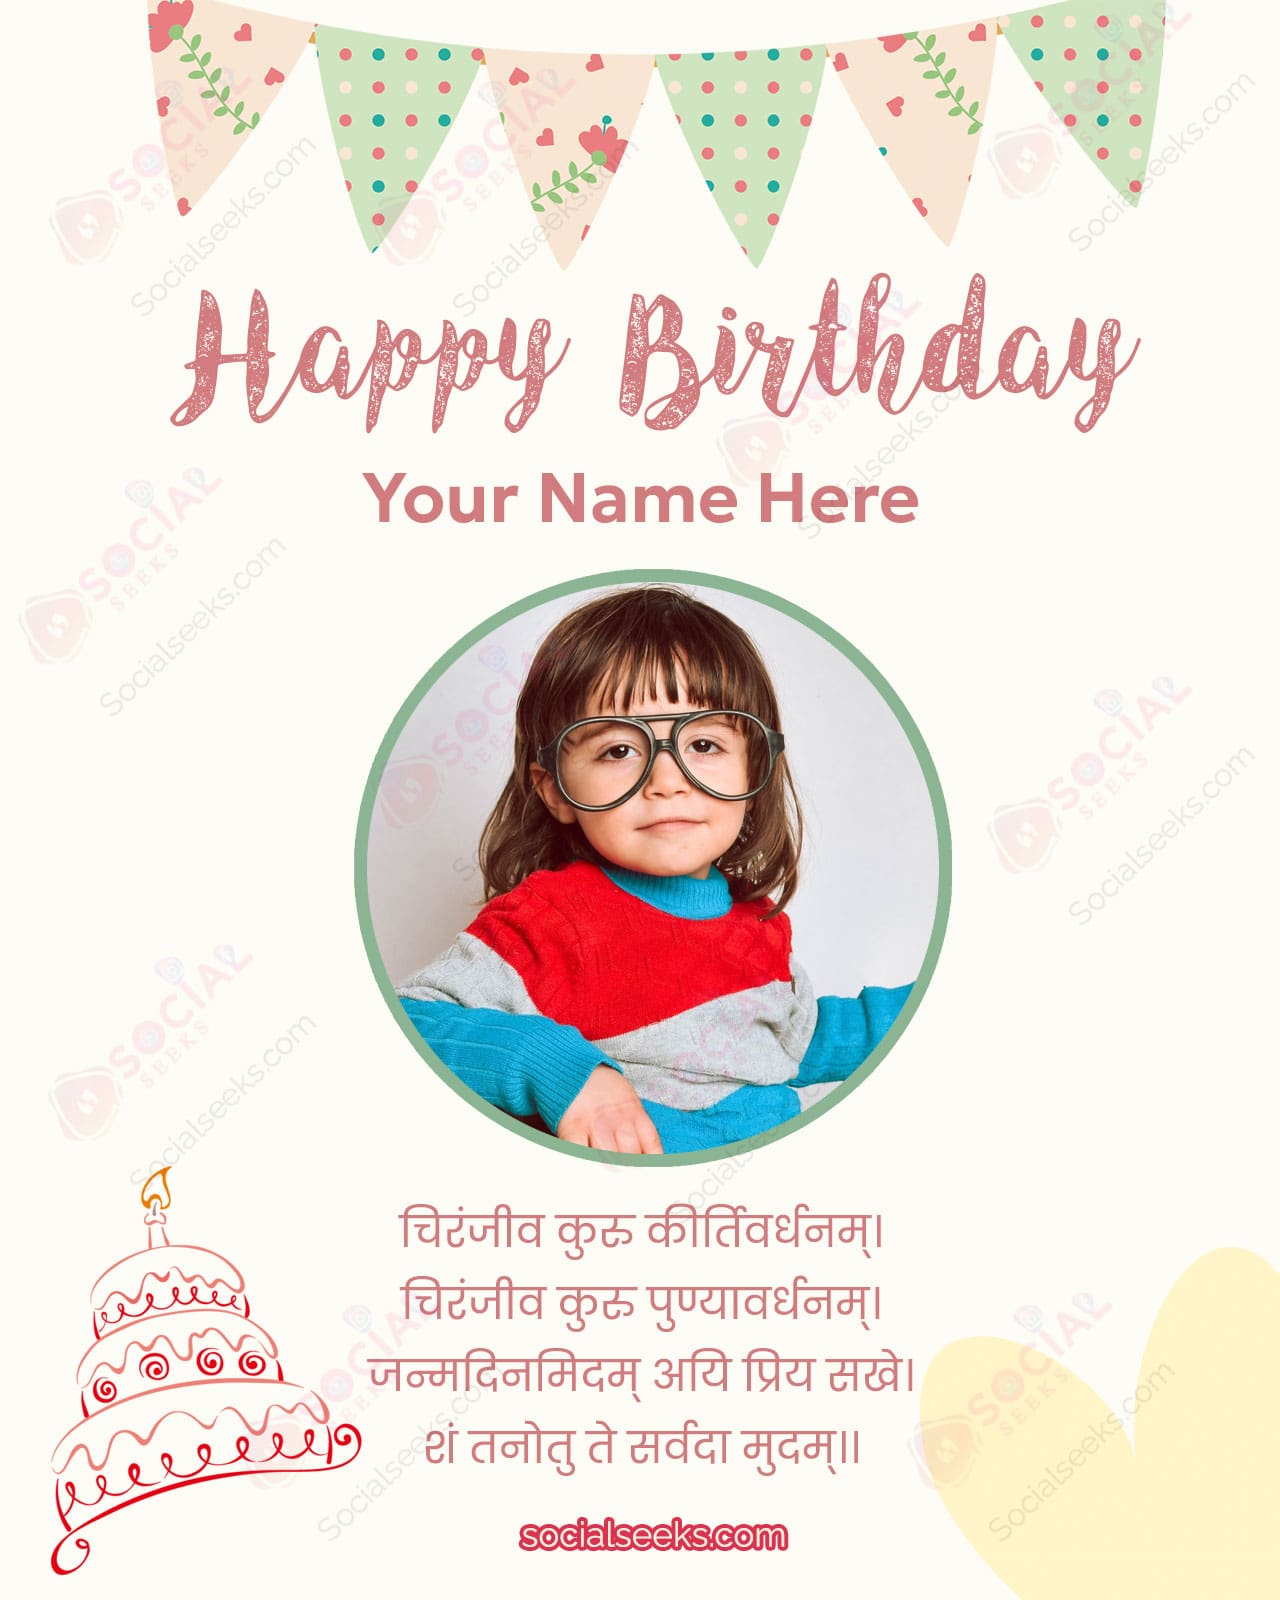 Birthday Wishes Photo Frame For Kids With Name